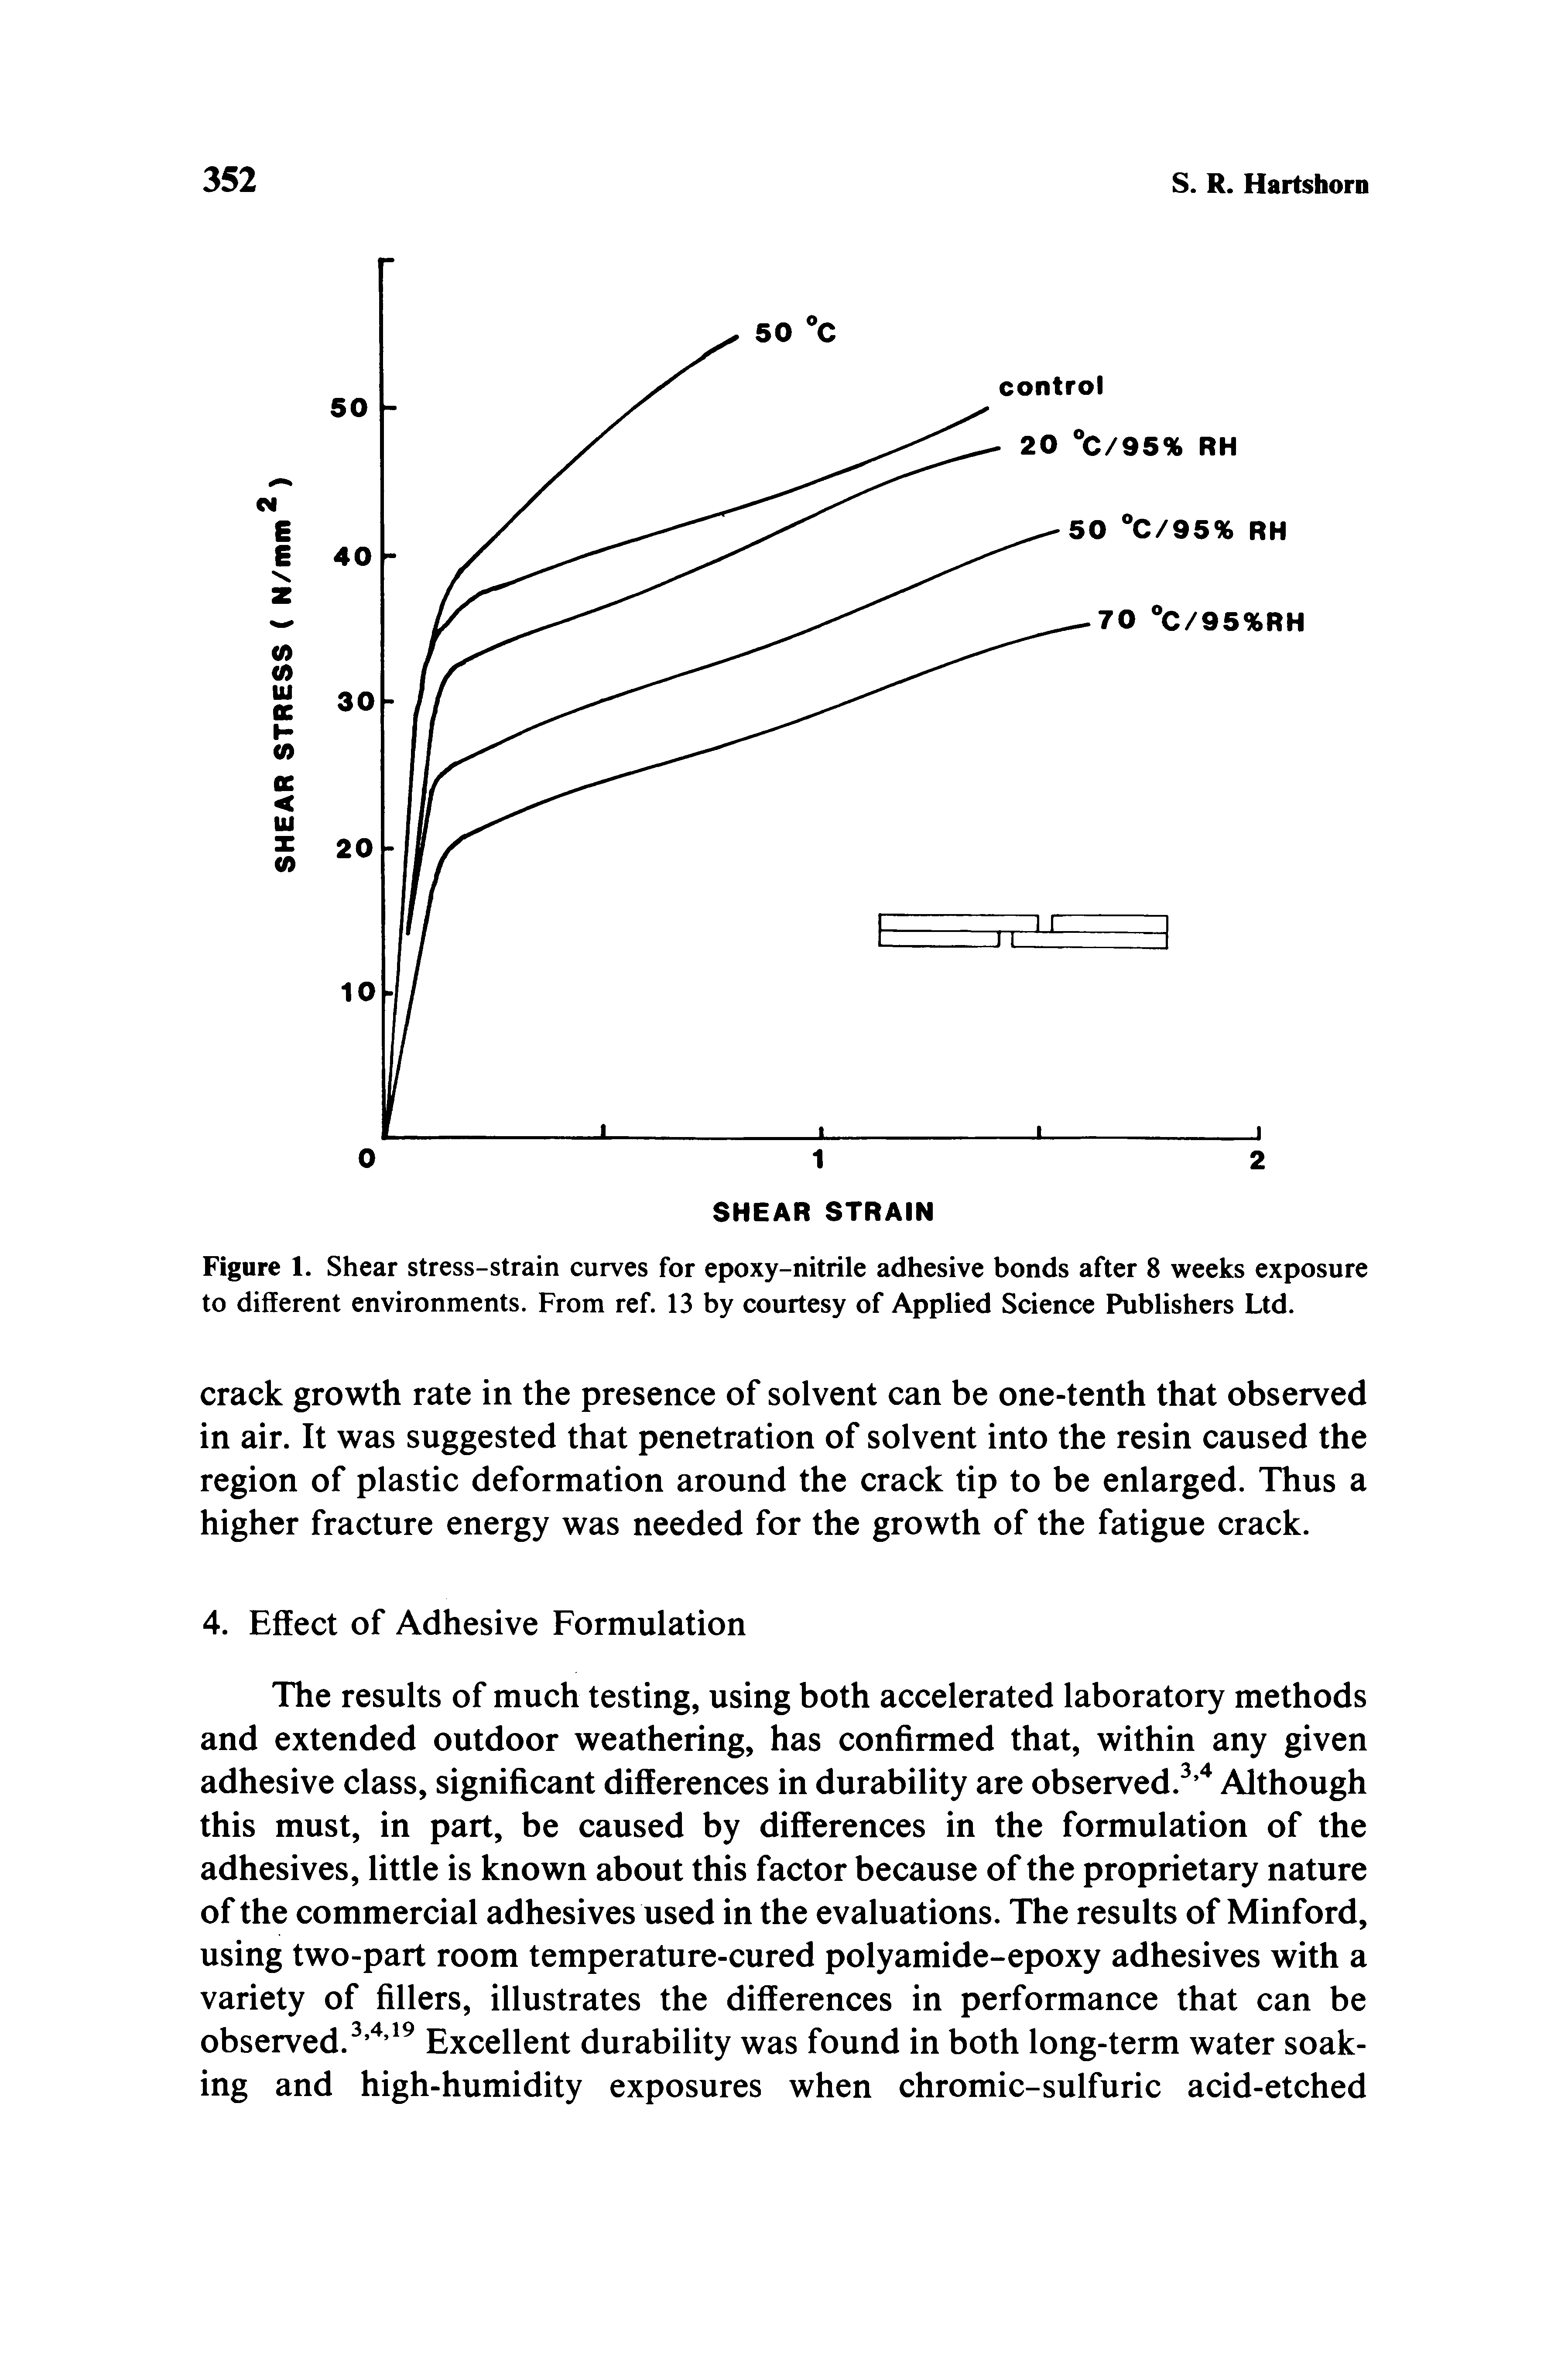 Figure 1. Shear stress-strain curves for epoxy-nitrile adhesive bonds after 8 weeks exposure to different environments. From ref. 13 by courtesy of Applied Science Publishers Ltd.